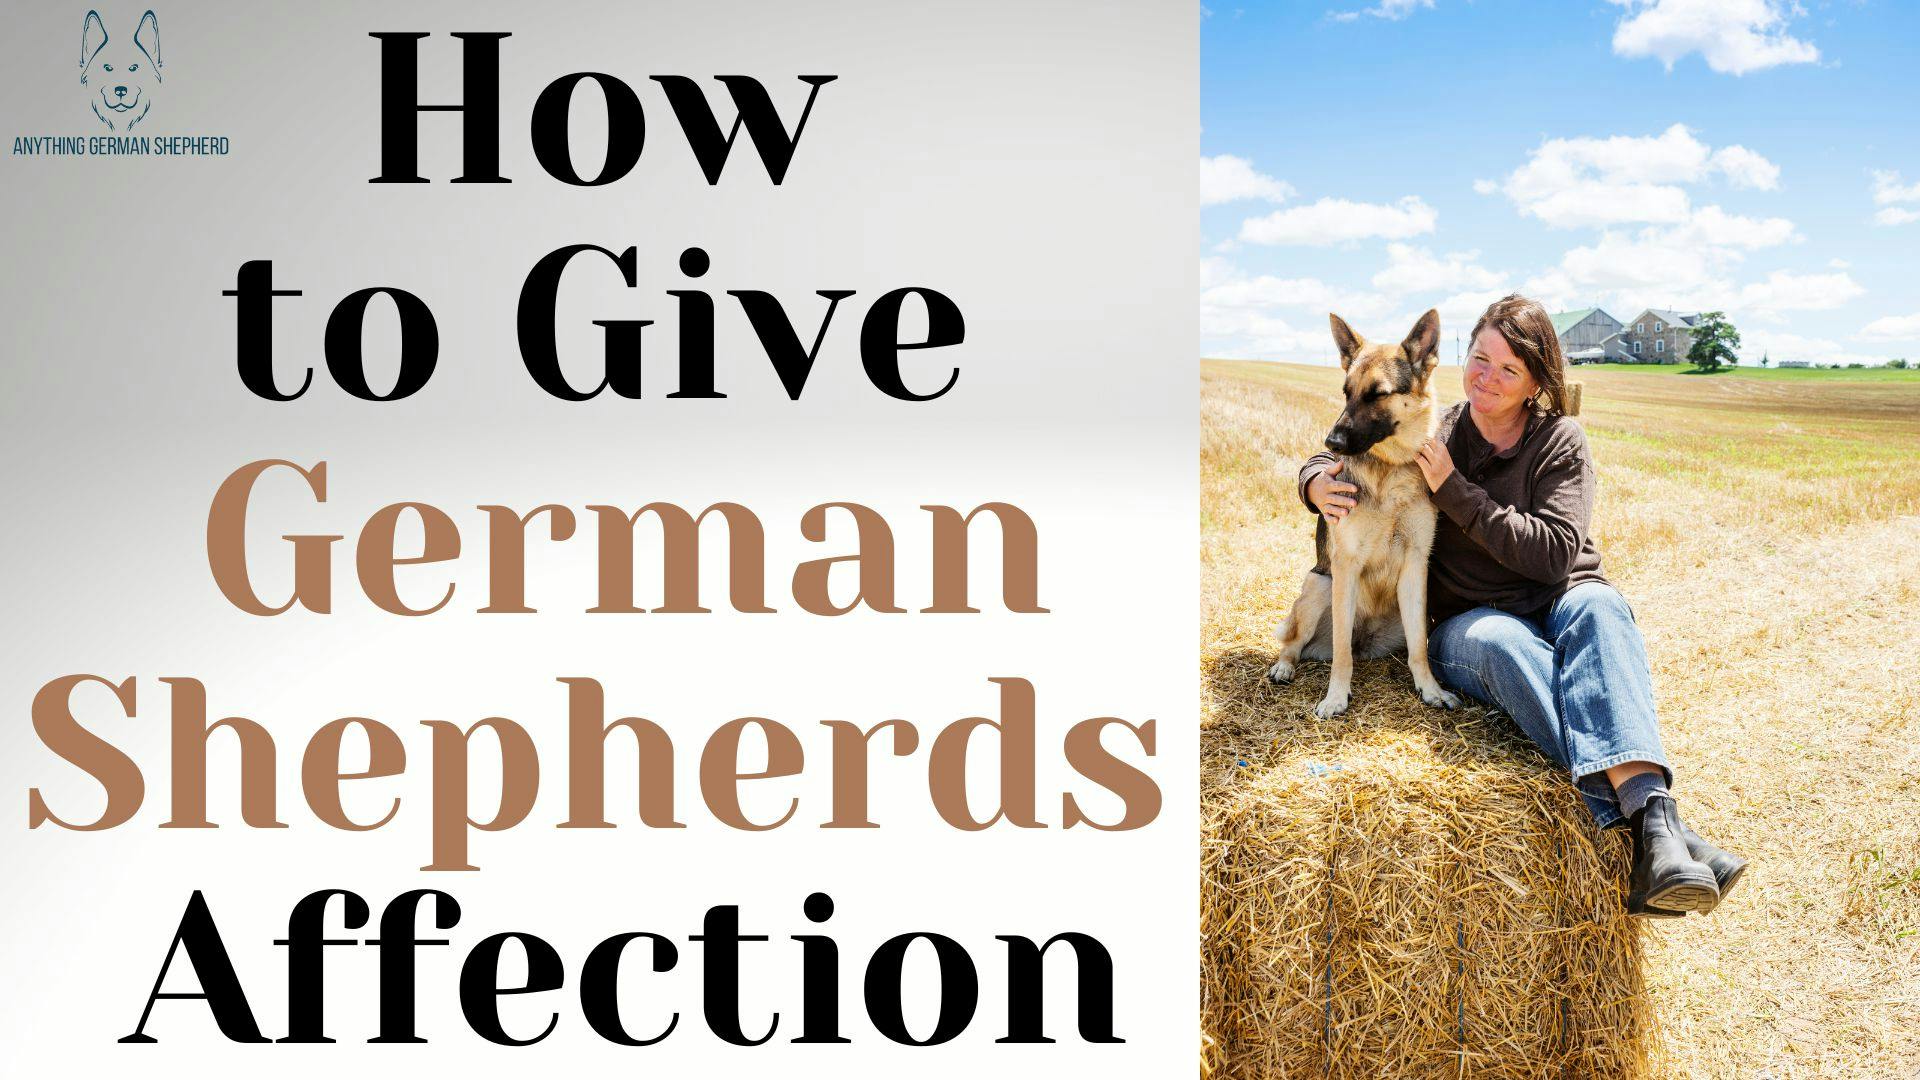 How to Give German Shepherds Affection